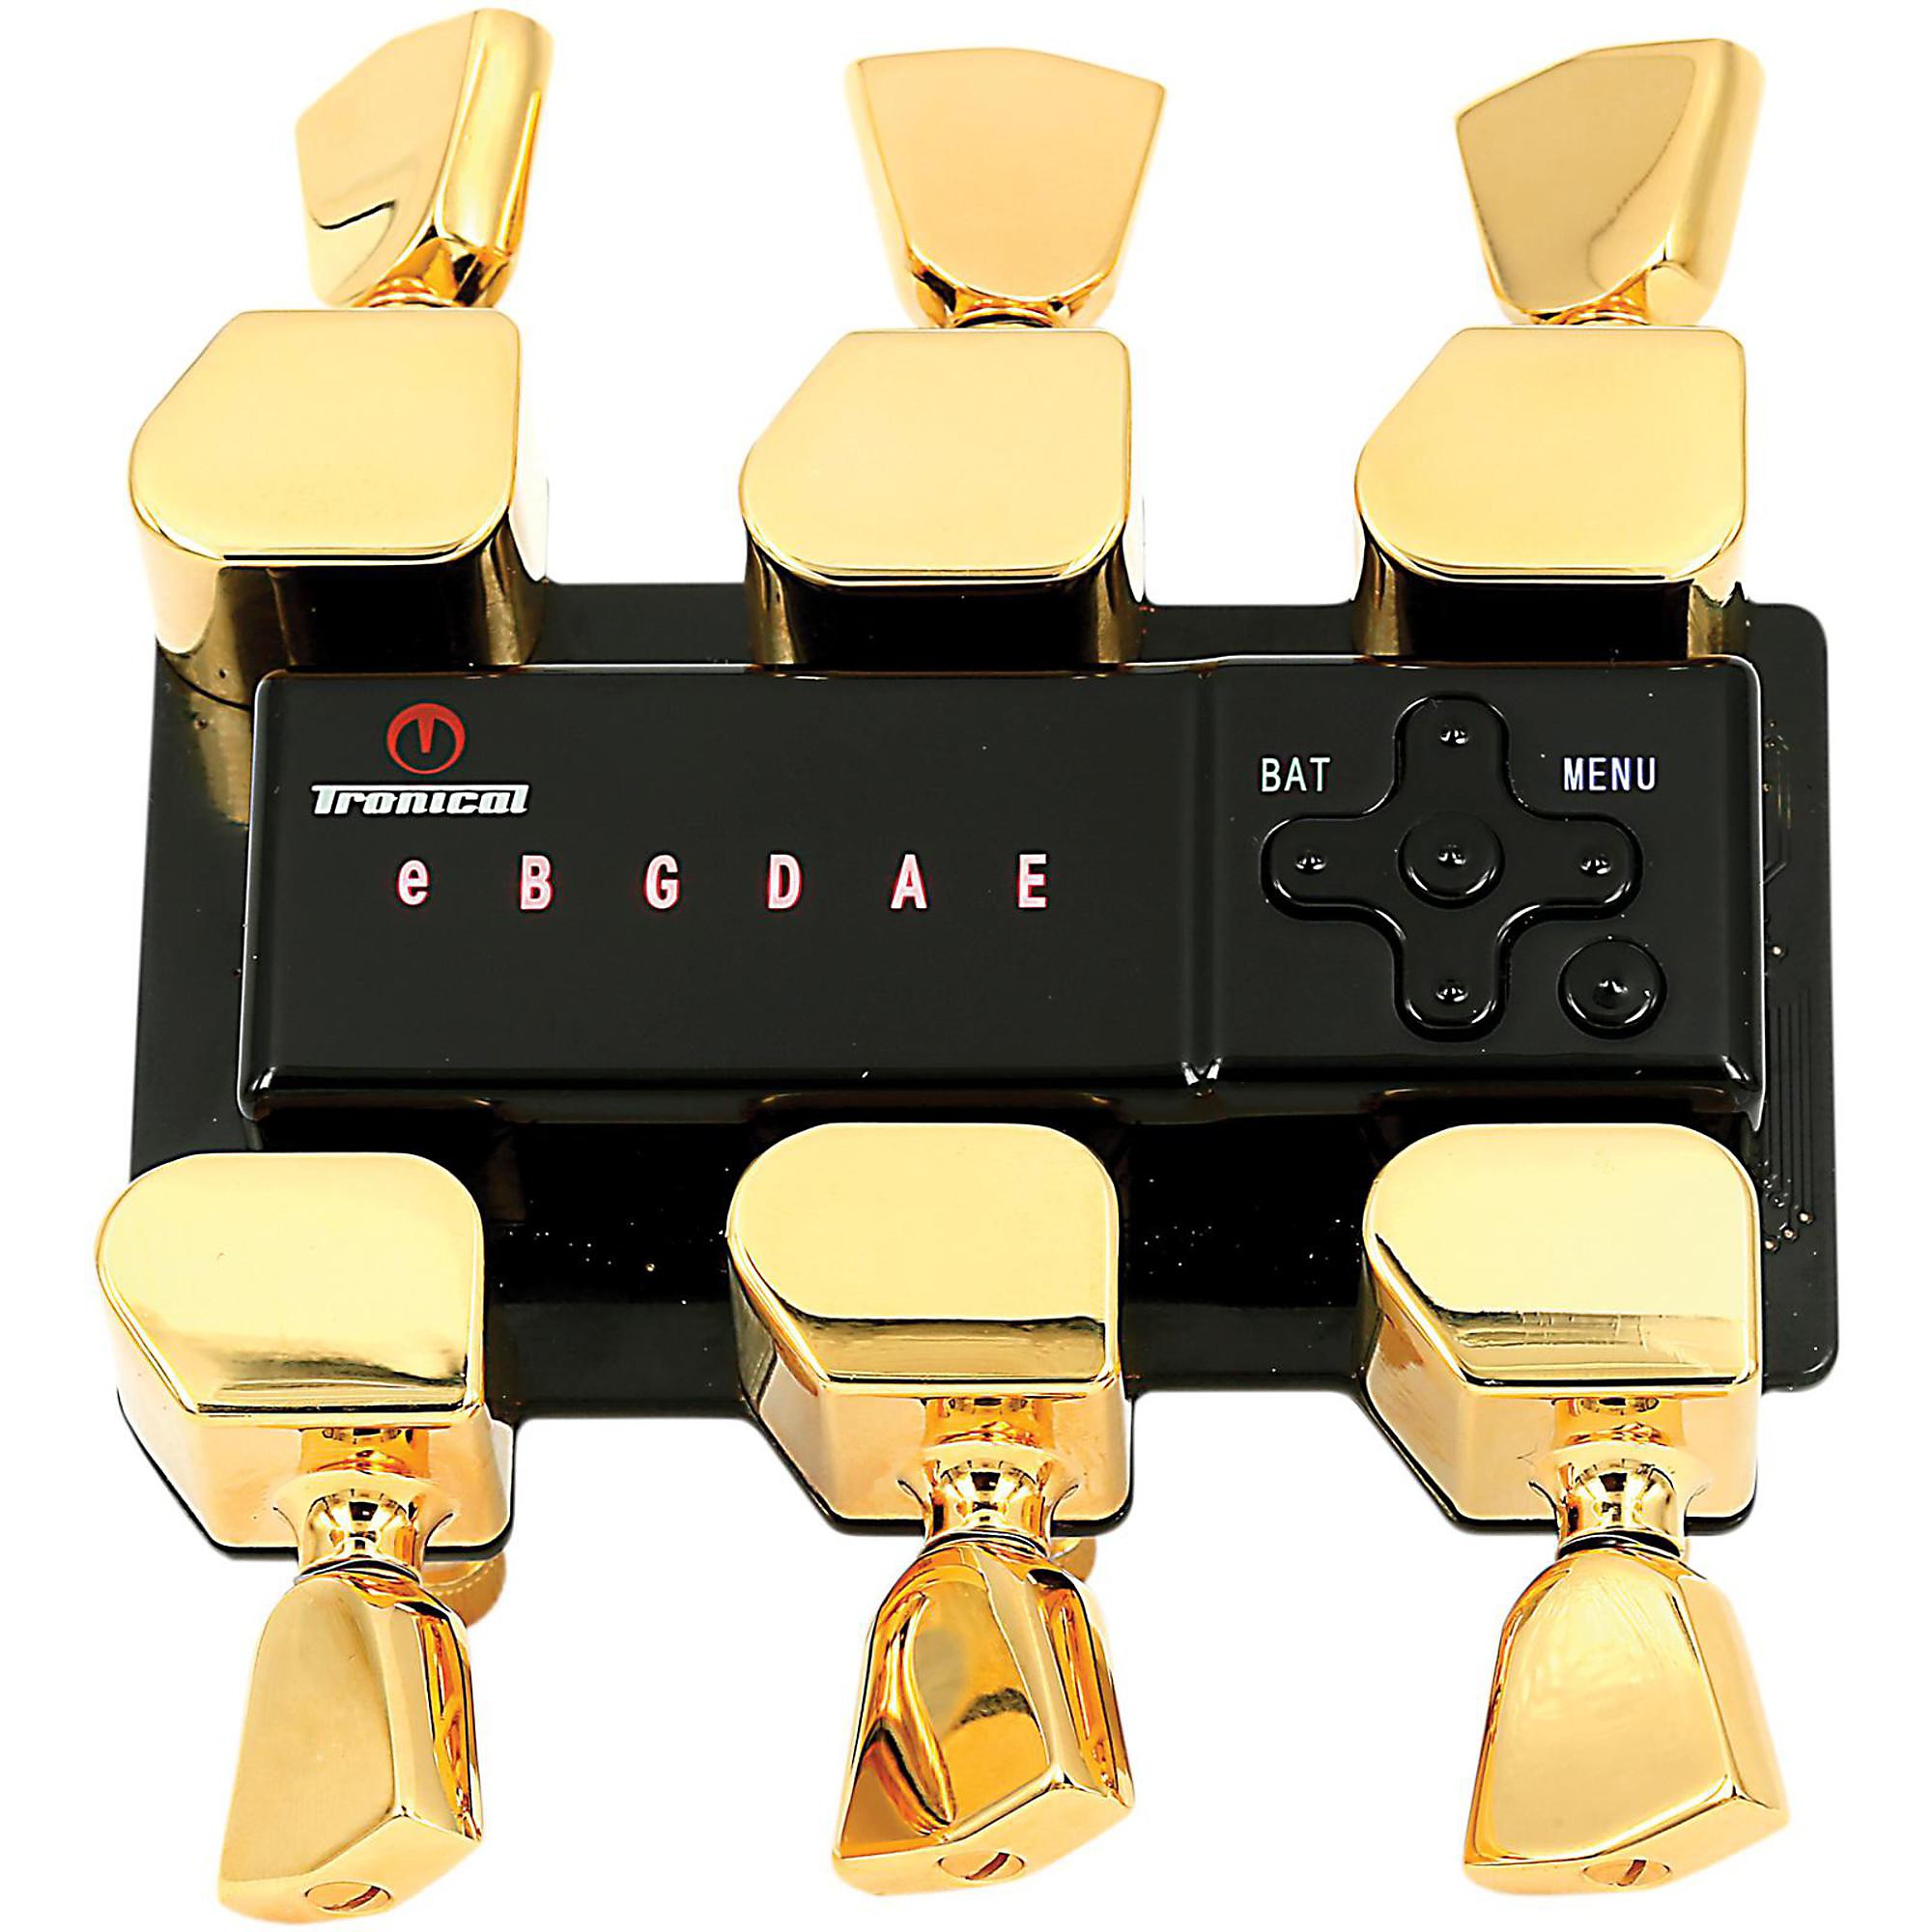 virksomhed Mesterskab Præfiks Tronical Tuning Systems Type A Self Tuner for Gibson Guitars Gold Tulip  Button | Guitar Center